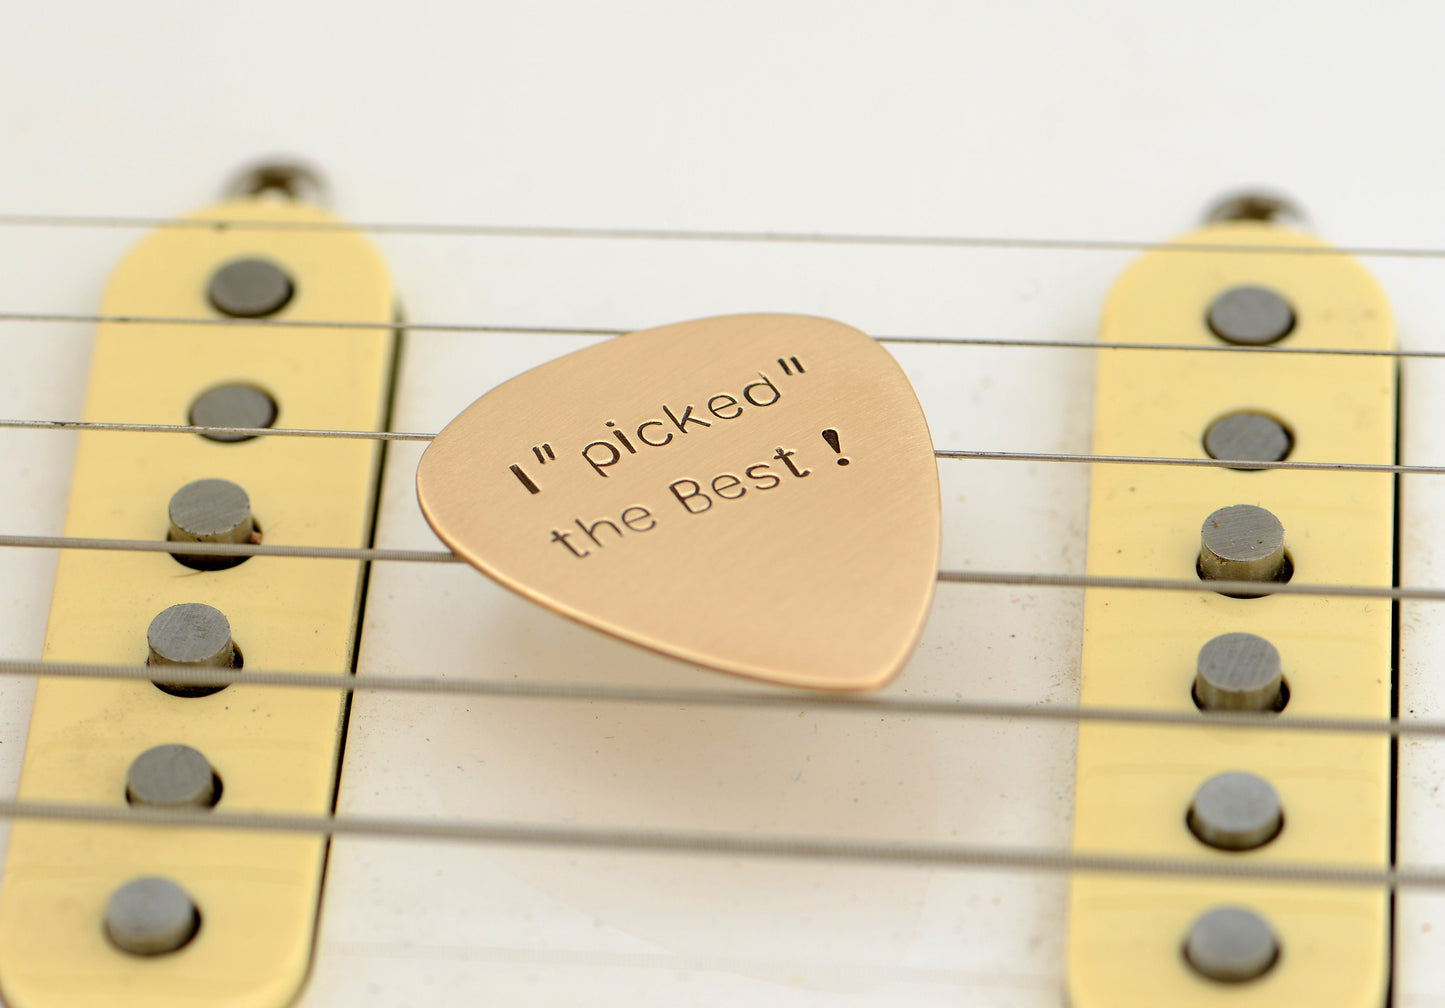 "I picked the best" guitar pick in bronze